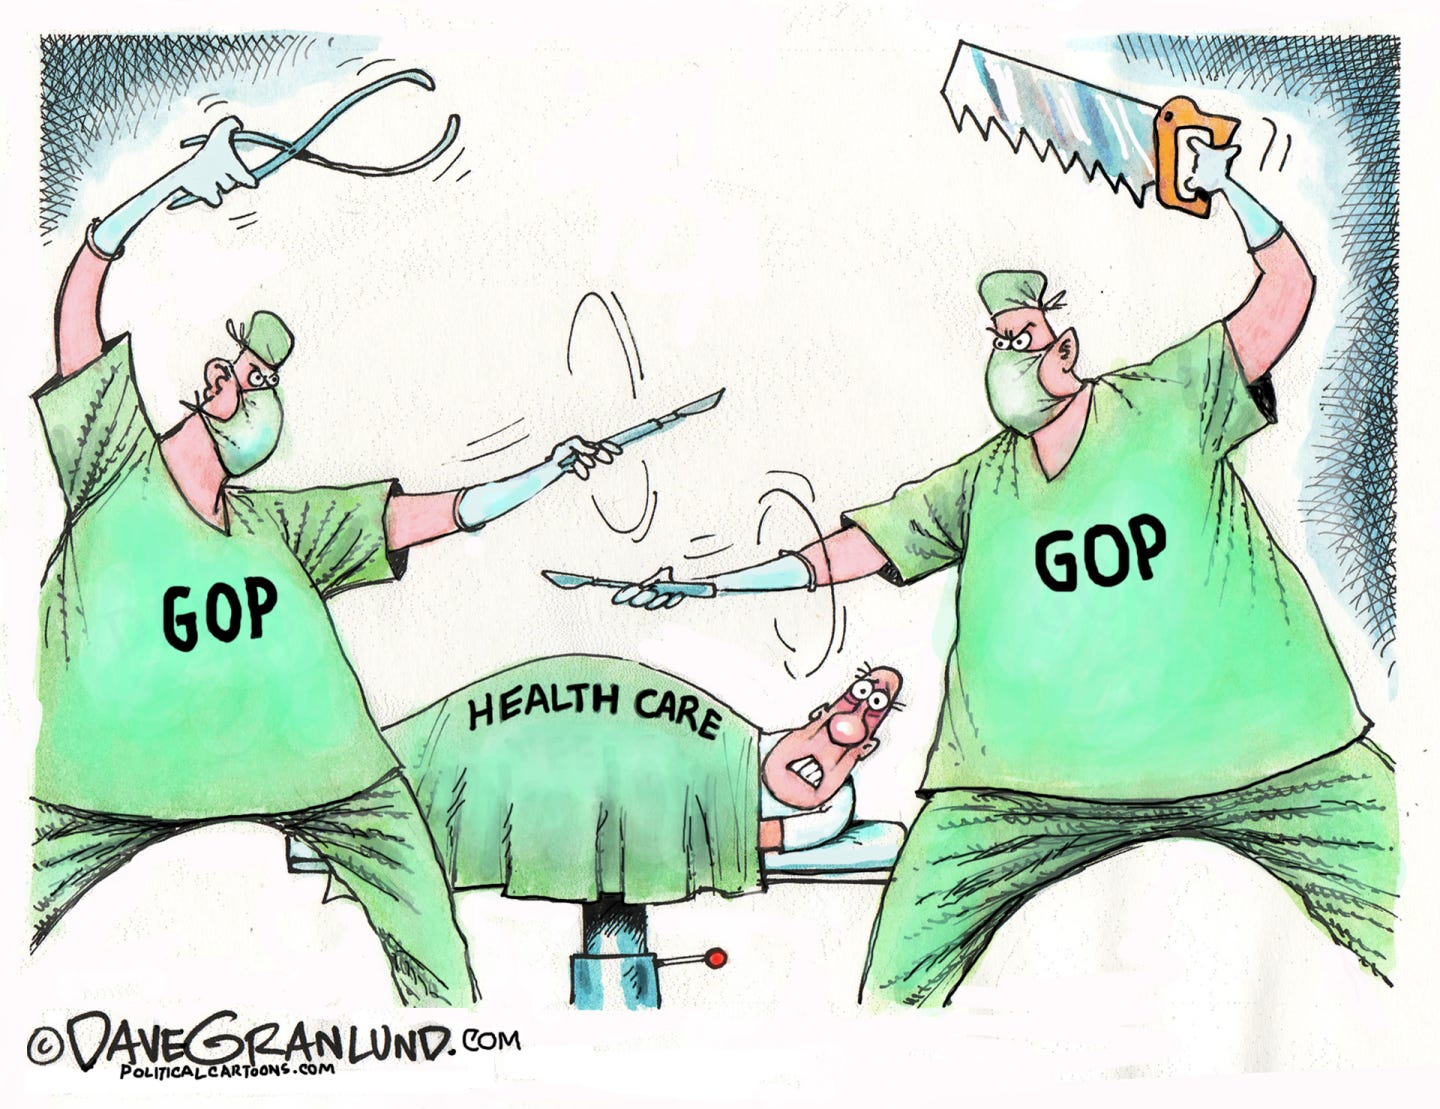 Republicans compete to cut Medicaid